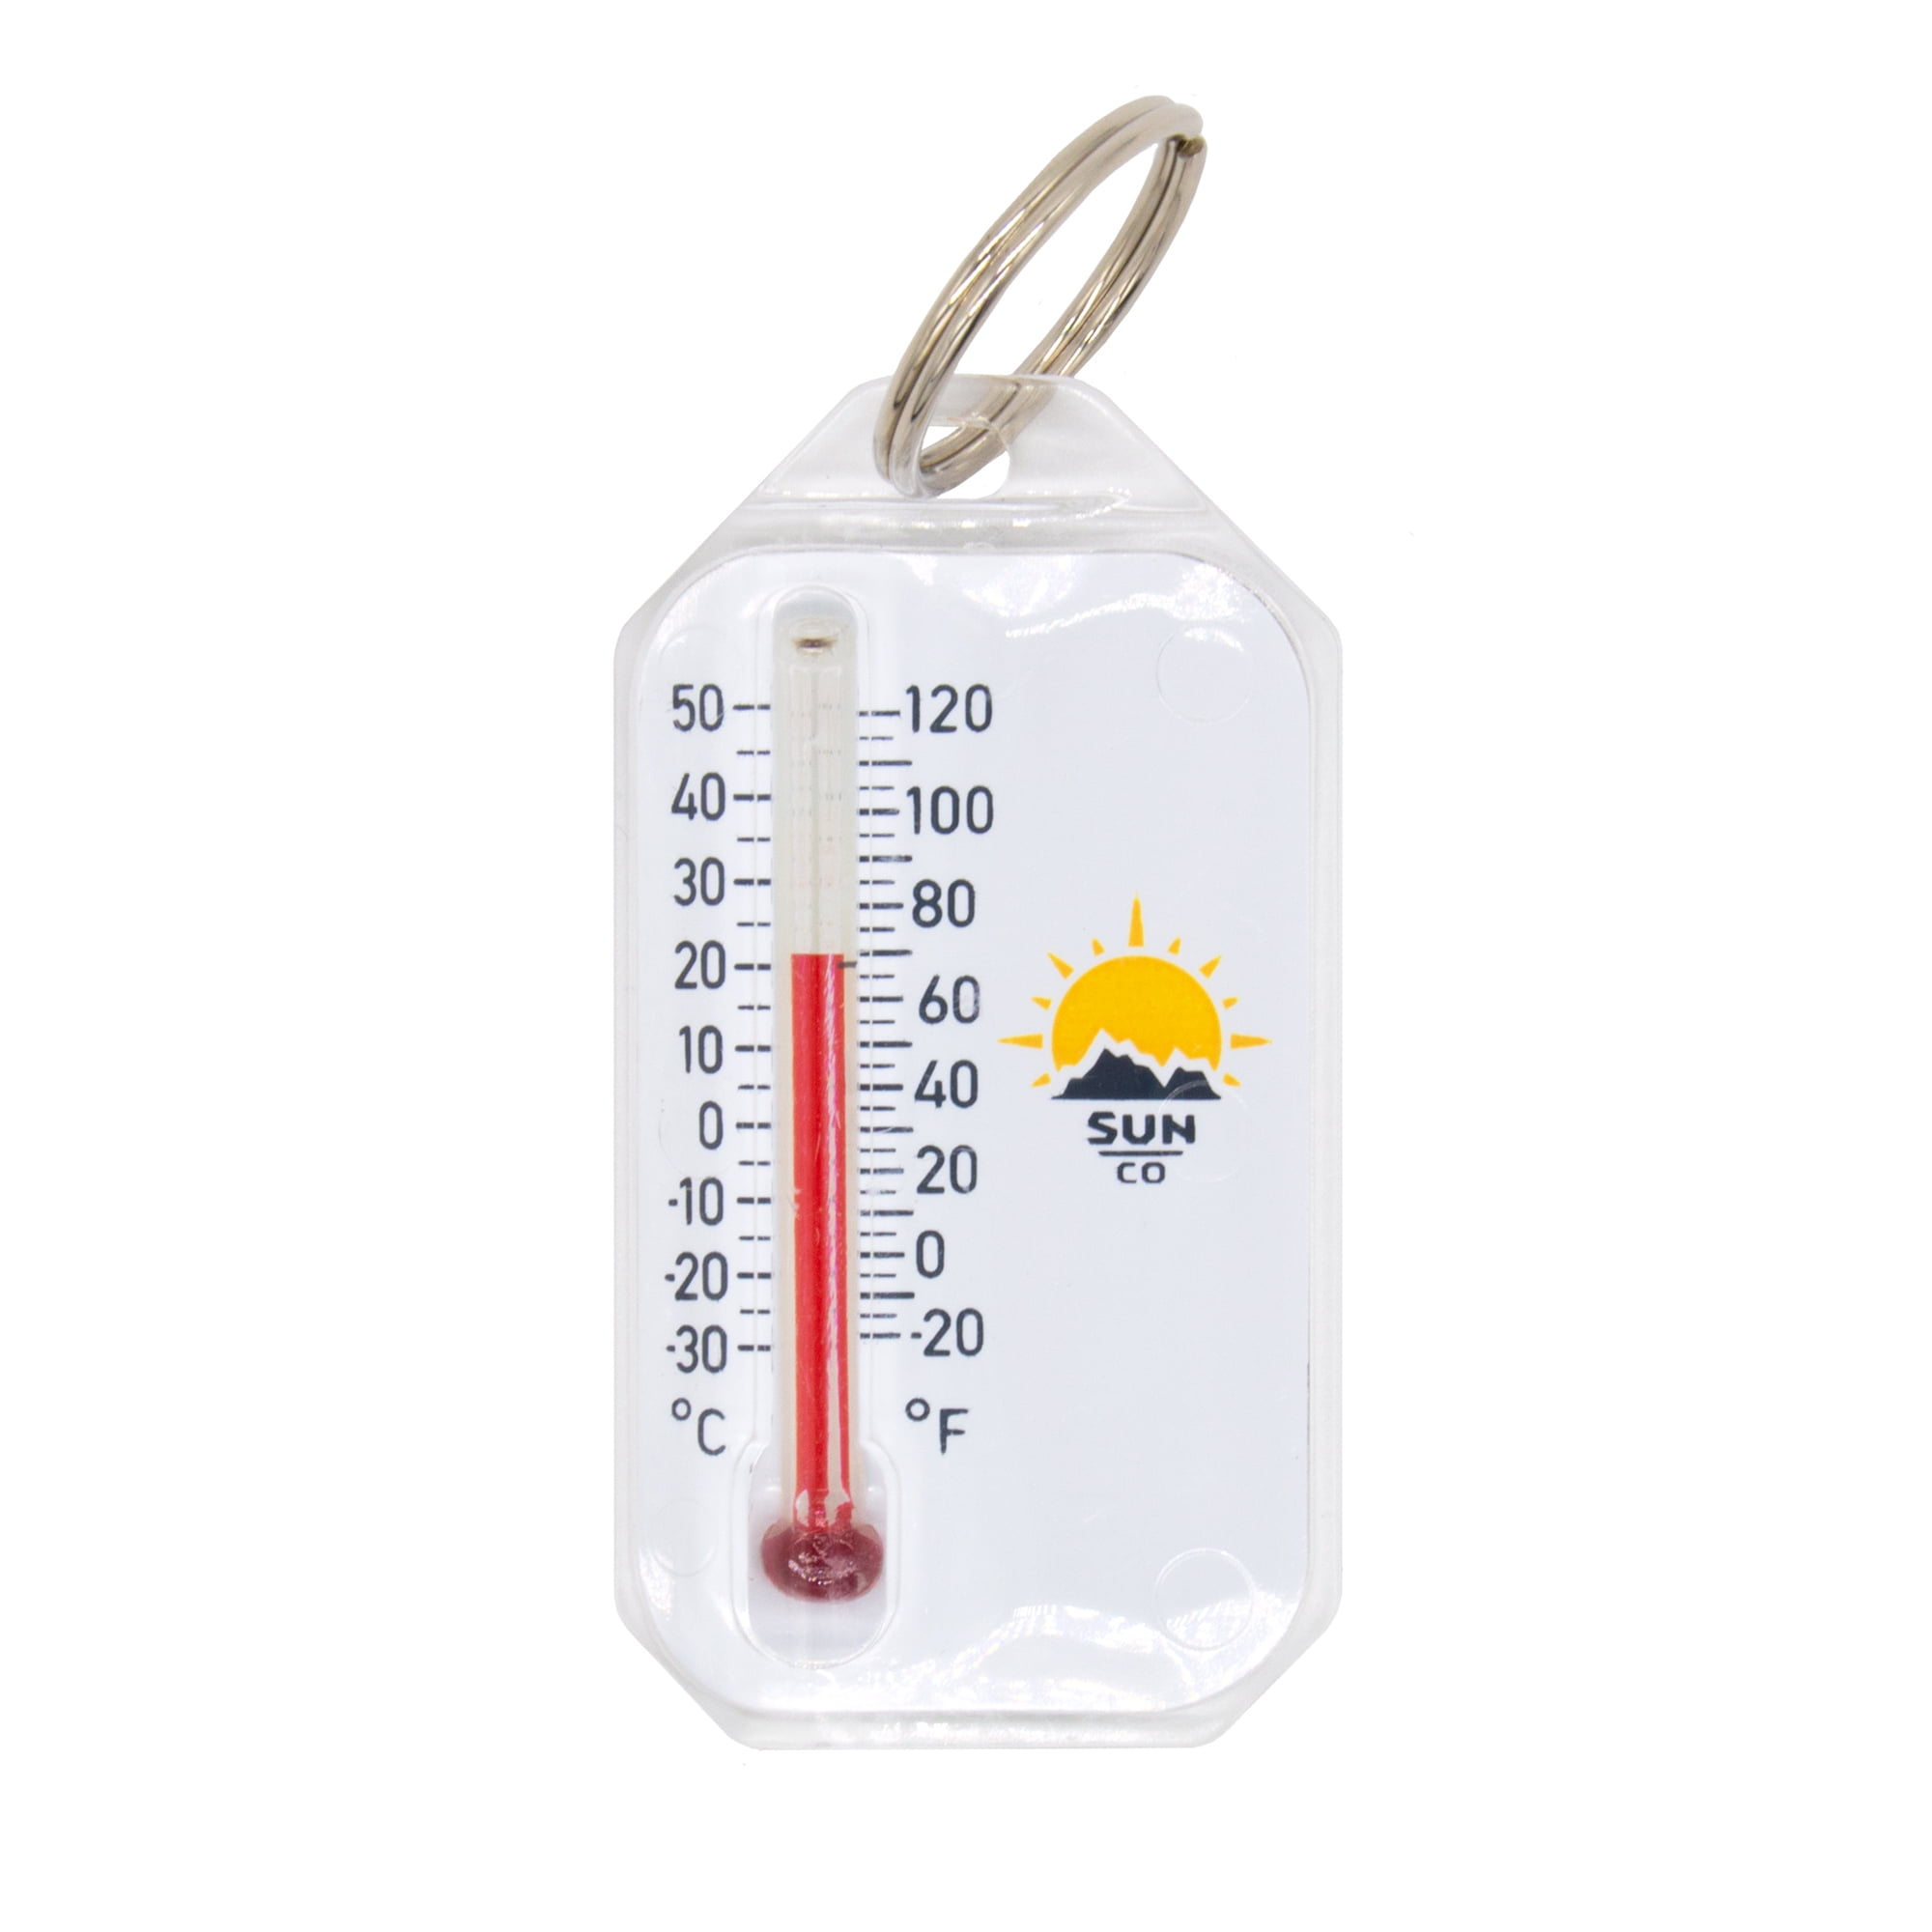 Sun Company Frig-o-gage - Thermometer for Refrigerator or Freezer